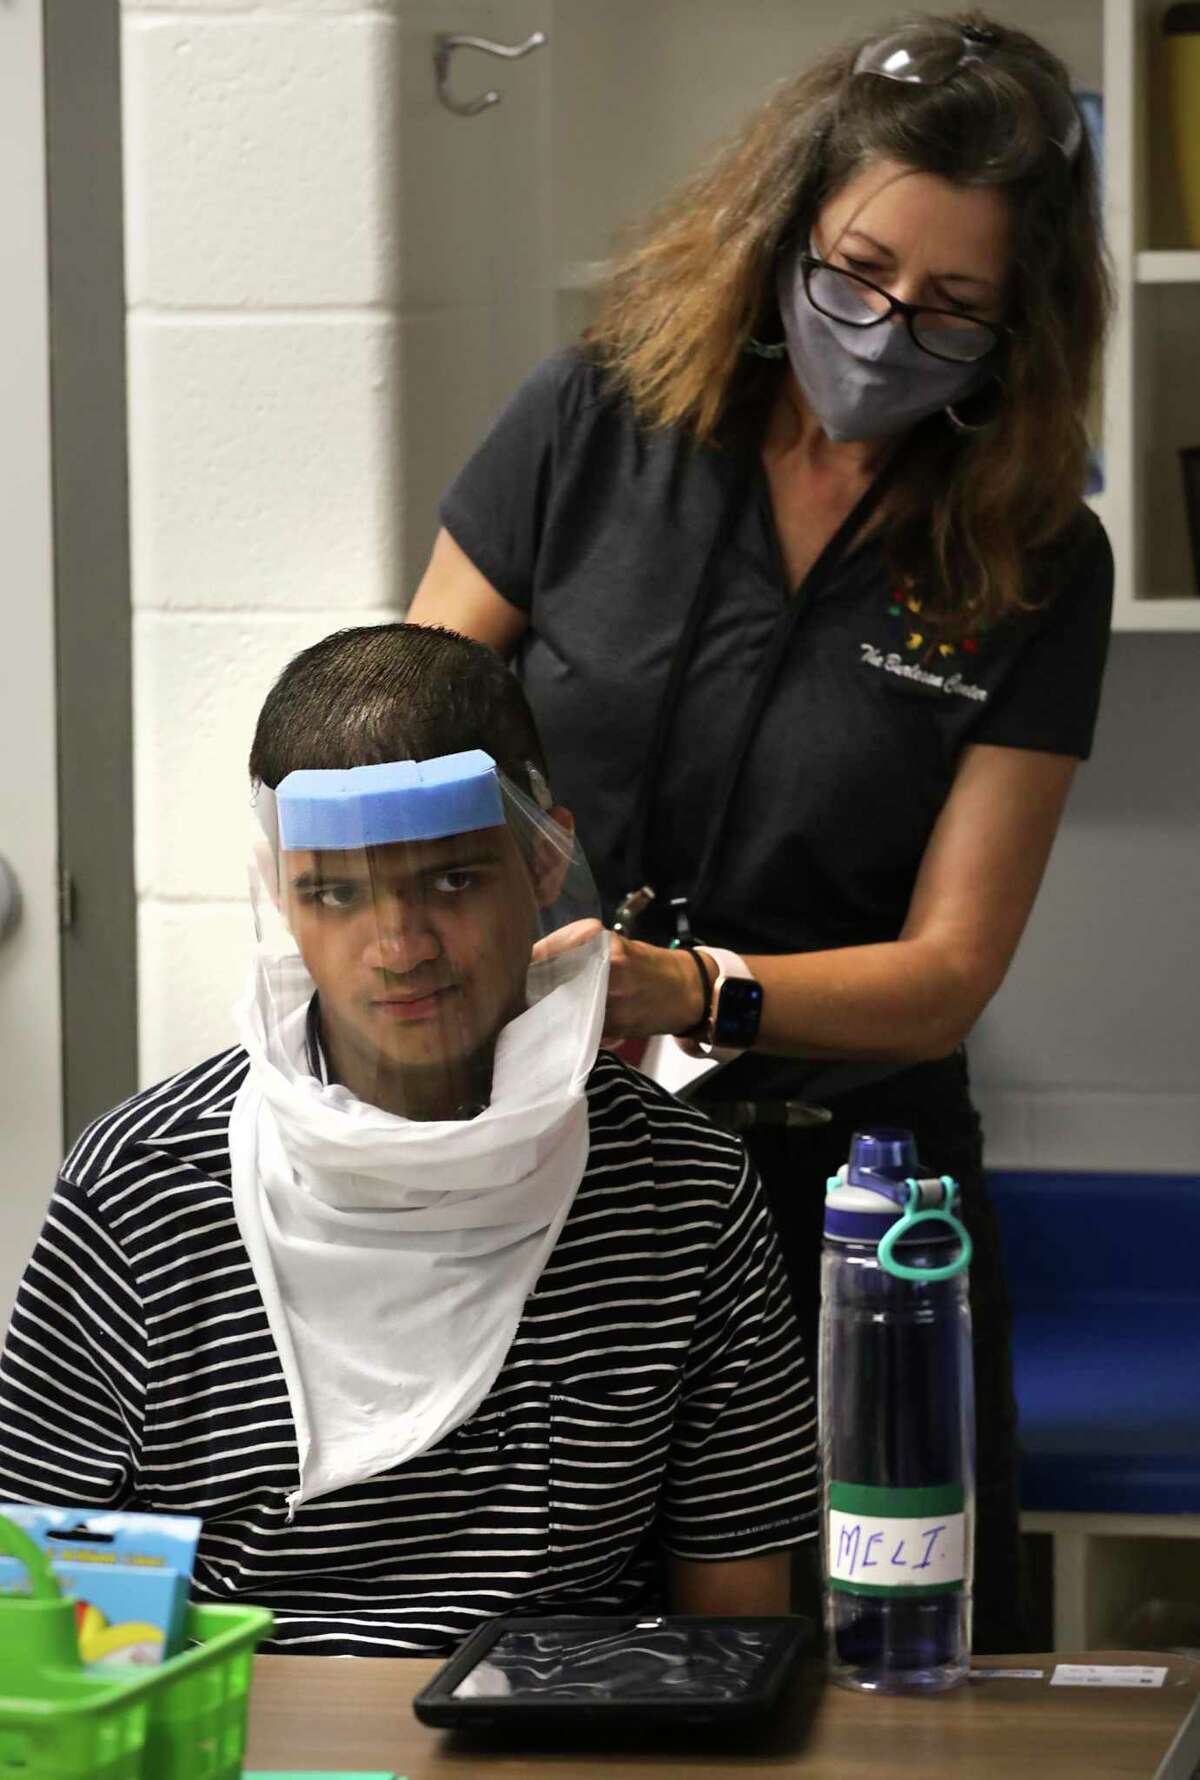 Lavonne Hill, above, an assistant teacher at the Burleson School for Innovation and Education in Edgewood ISD, helps Melchor Ibarra with his mask and face shield Thursday.